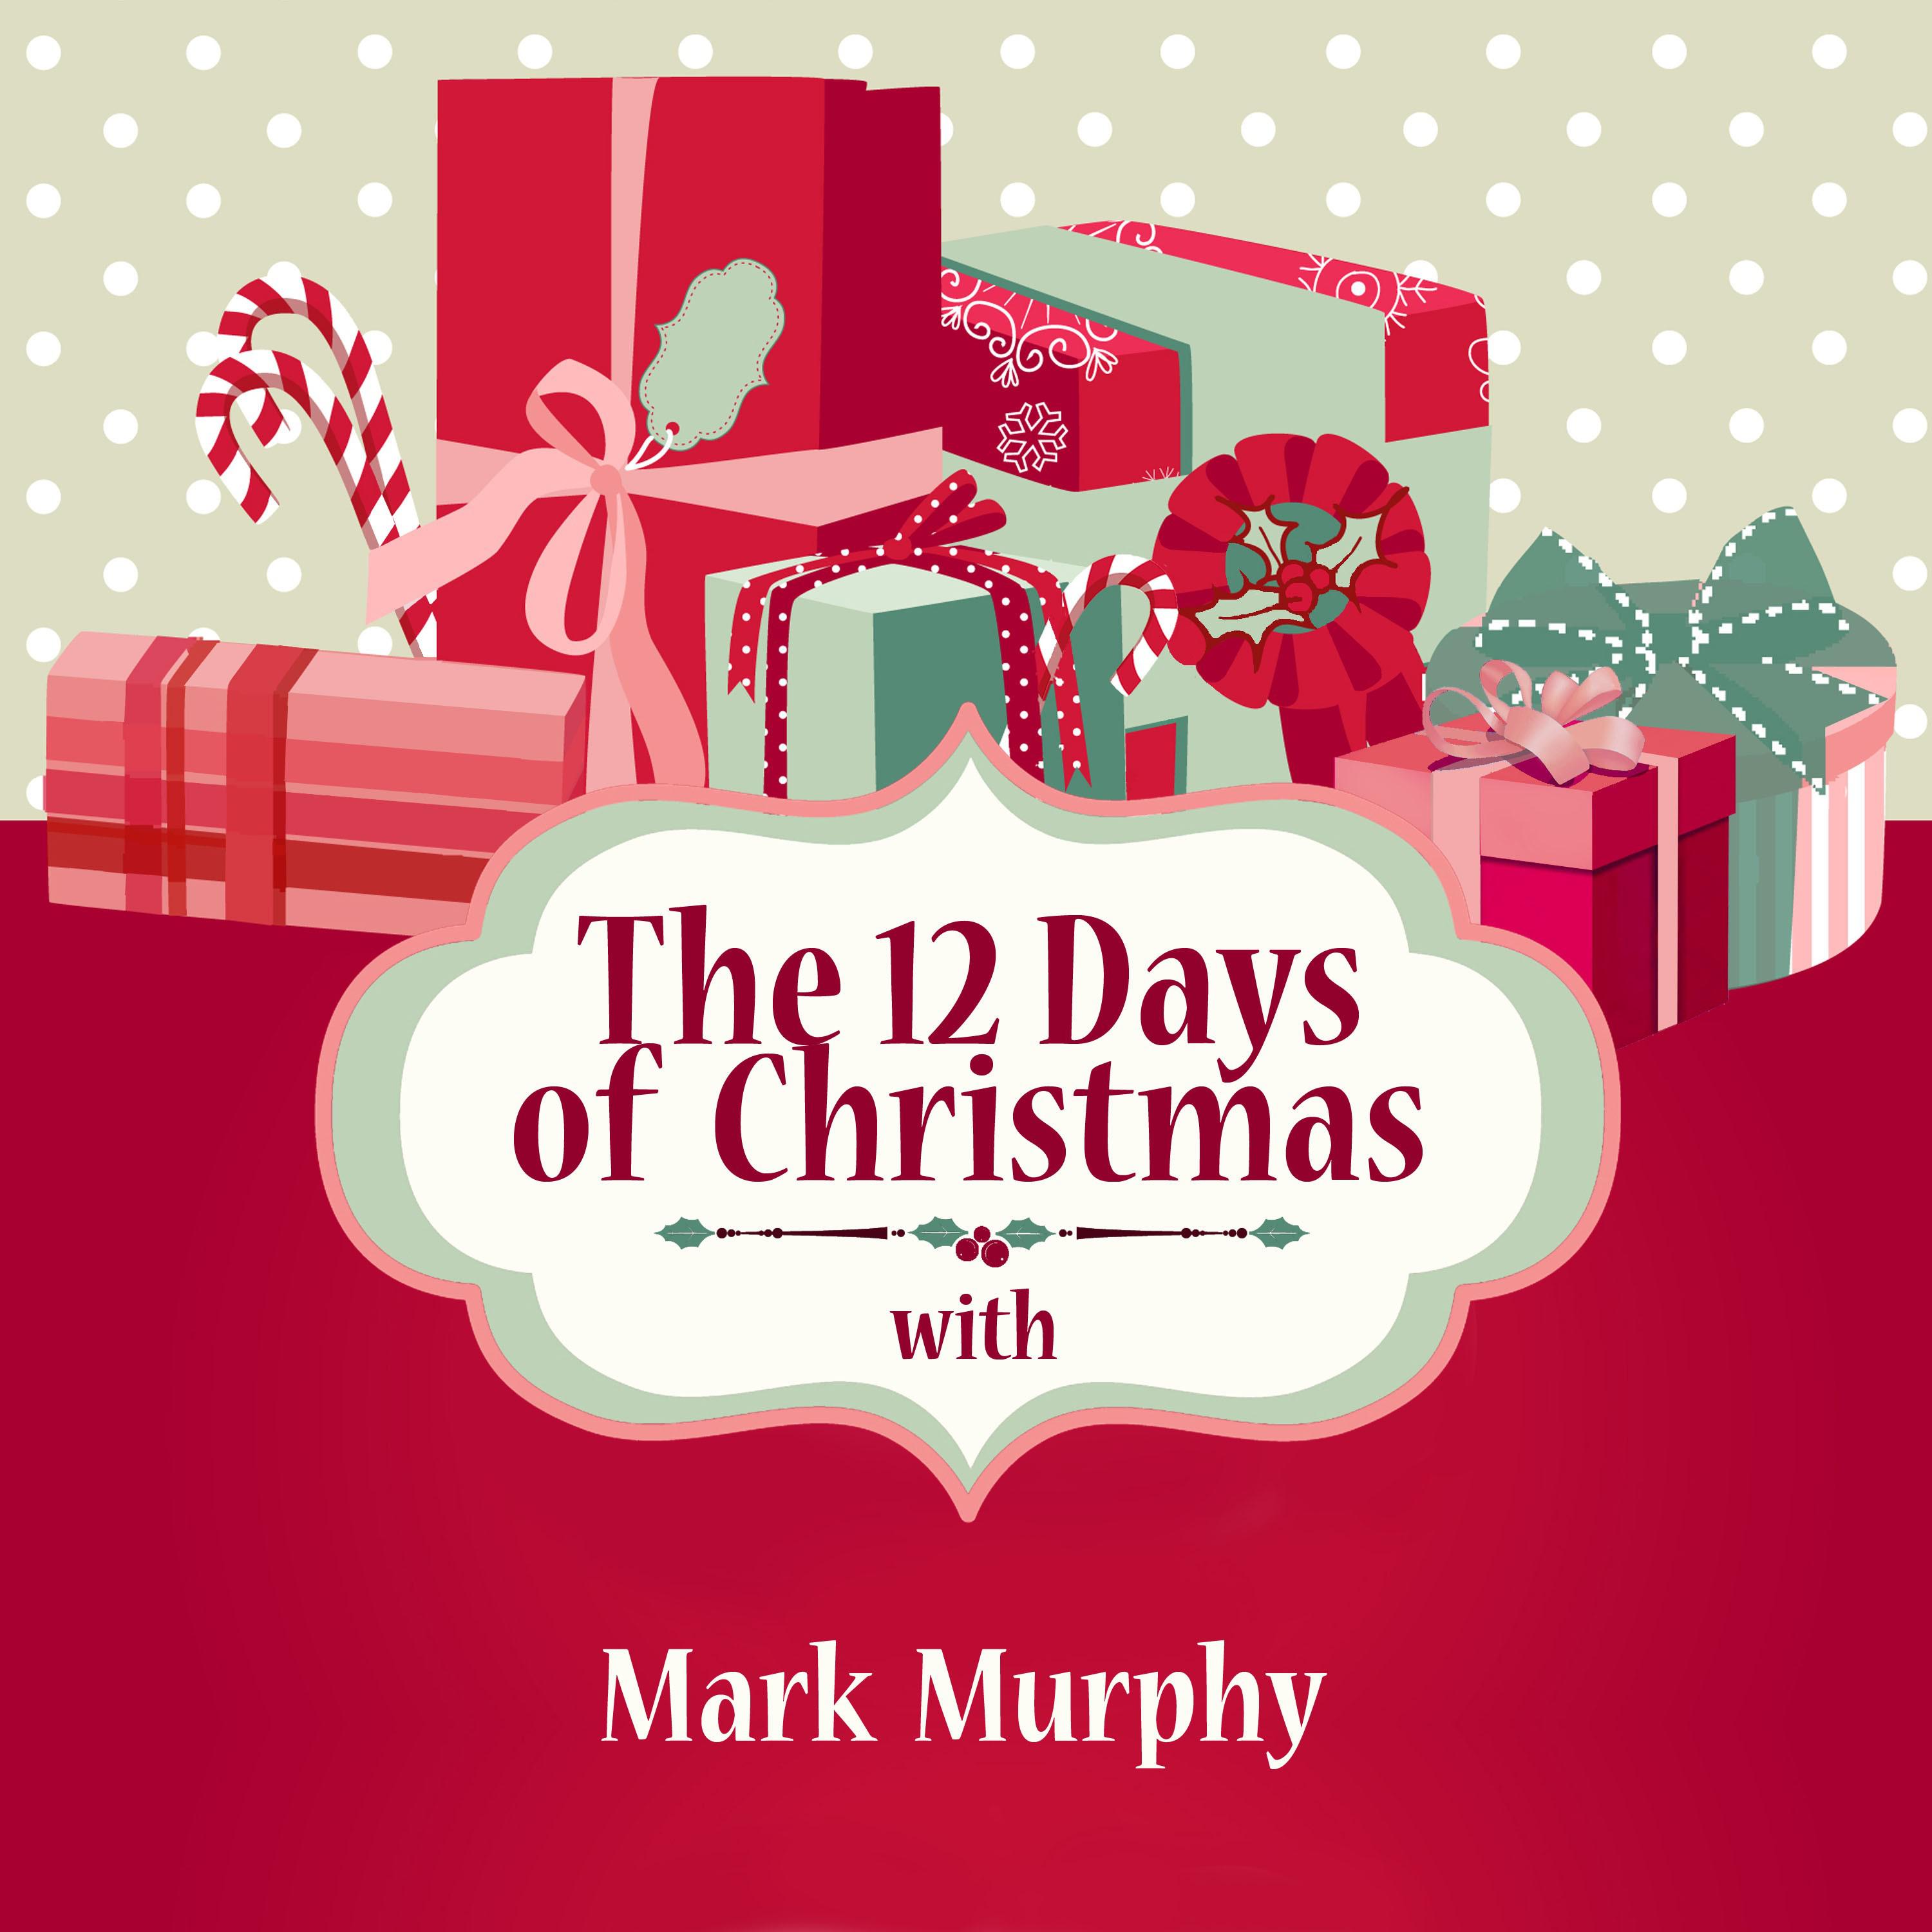 The 12 Days of Christmas with Mark Murphy